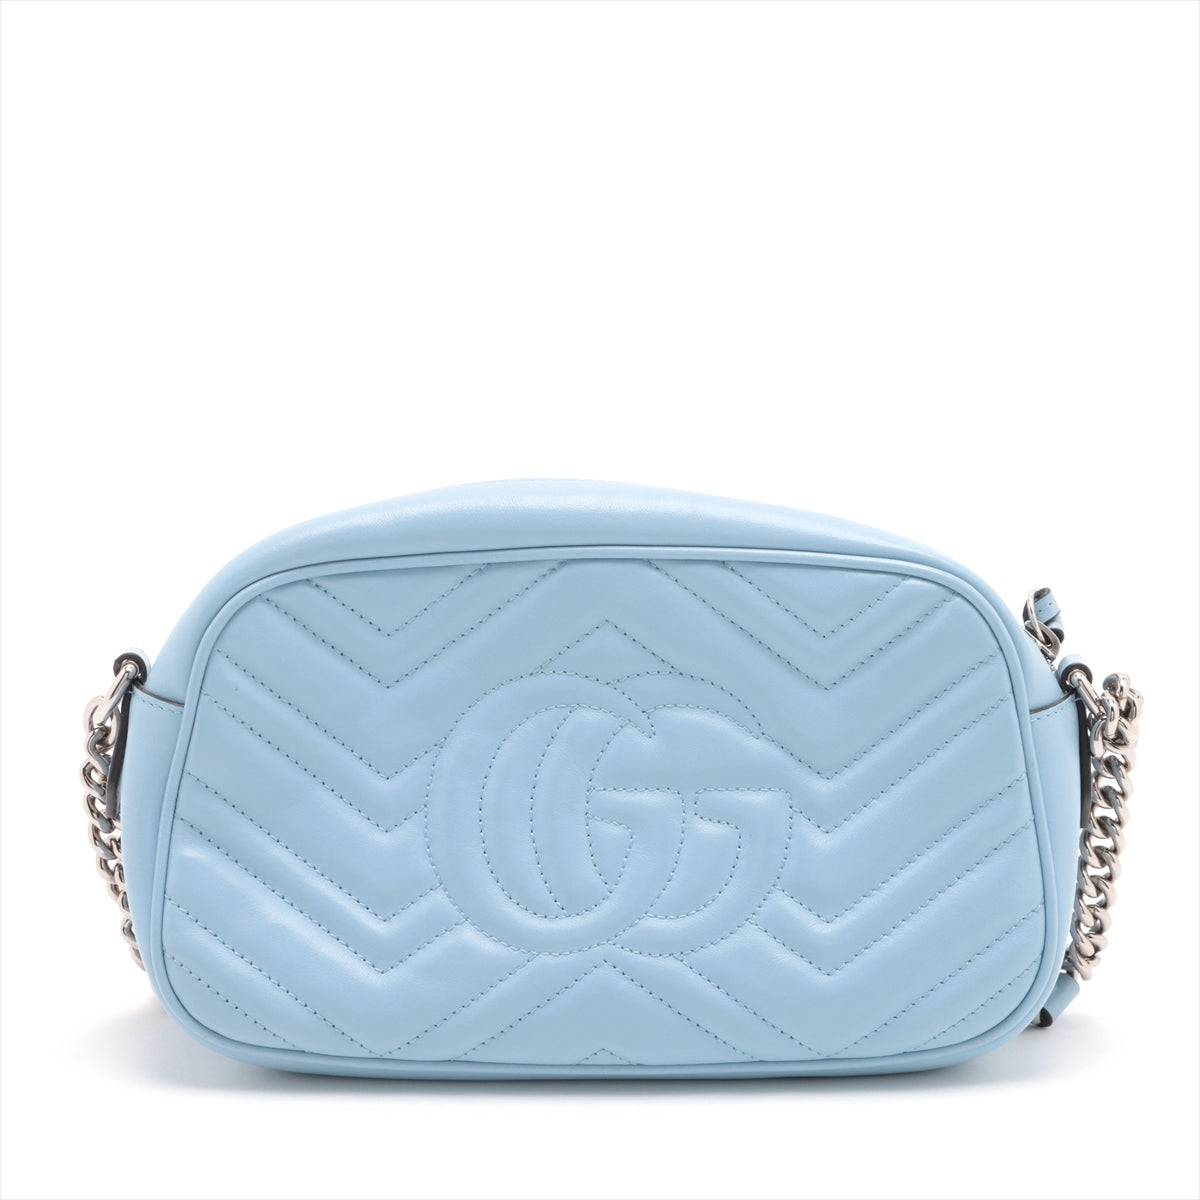 Gucci GG Marmont Leather Chain shoulder bag Blue 447632   Kobalame attached to the root